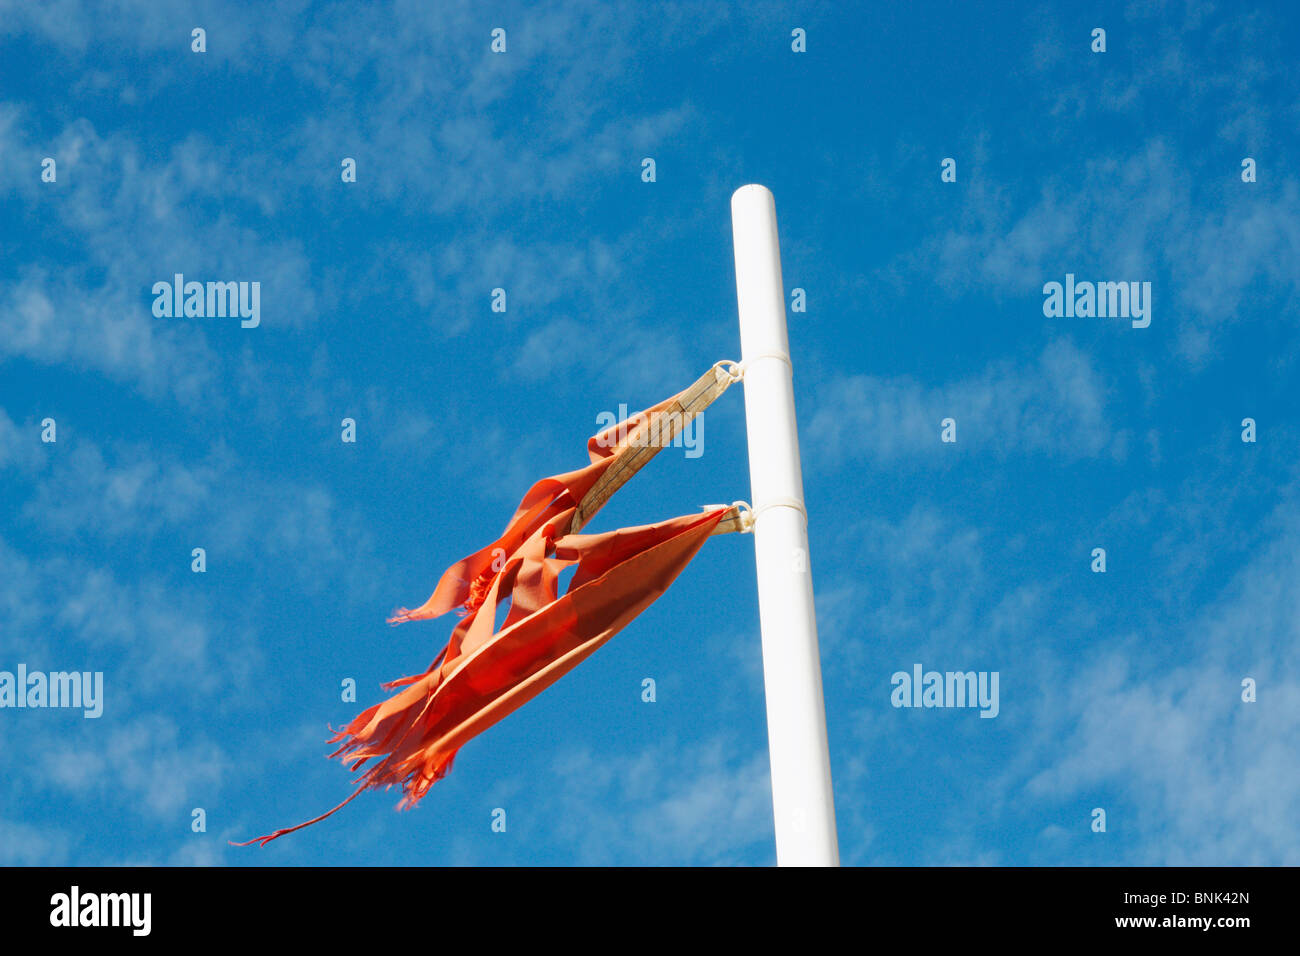 Tattered red flag on beach Stock Photo